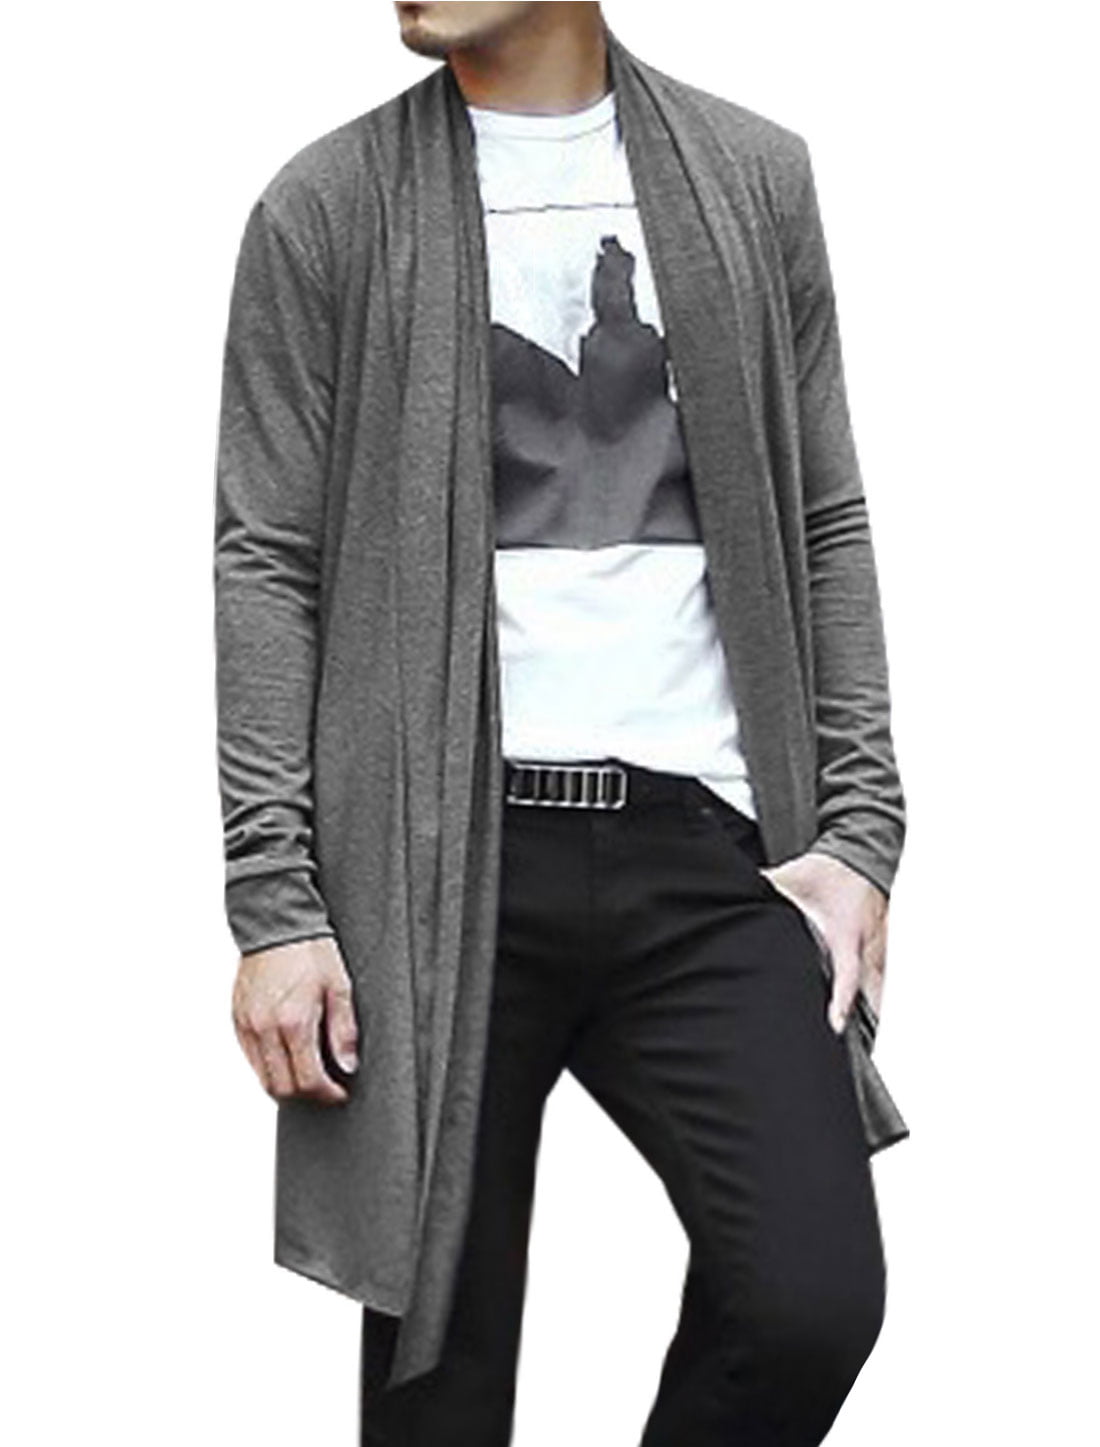  Cardigan  Homme  Col Front ouvert Haut Bas Ourlet Long  